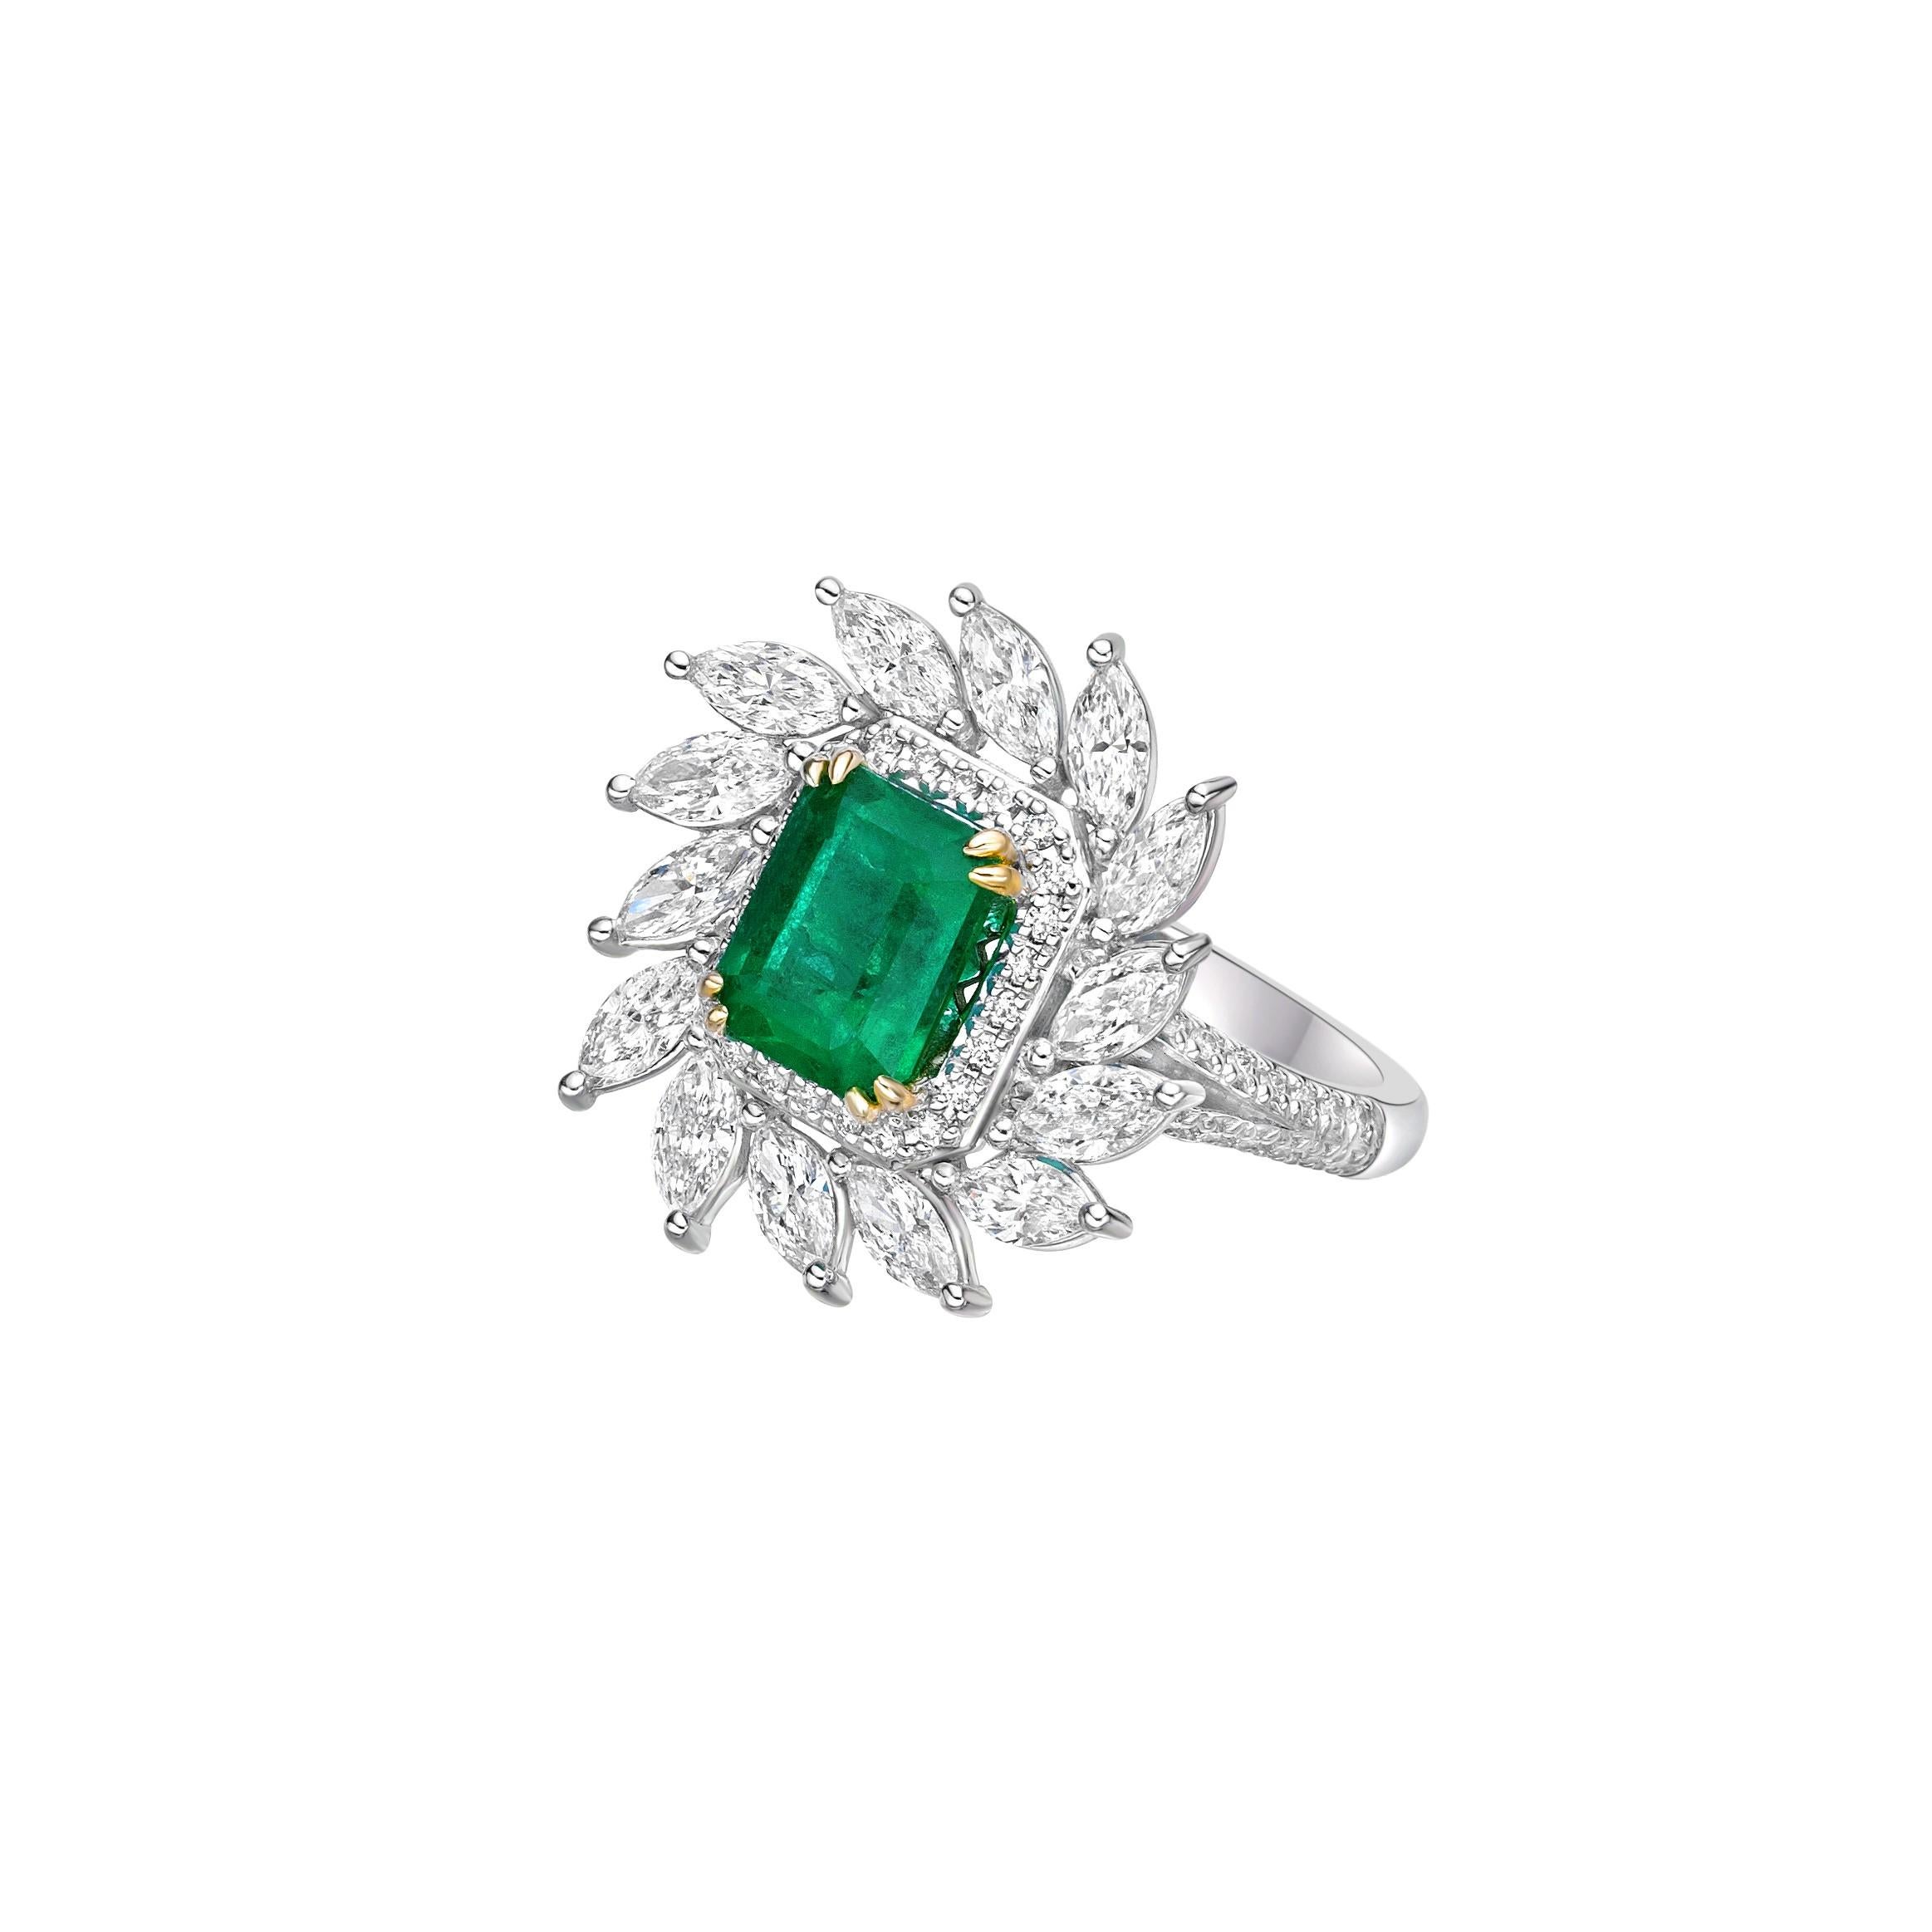 Octagon Cut 1.65 Carat Sunflower Emerald Bridal Ring in 18KWYG with White Diamond. For Sale